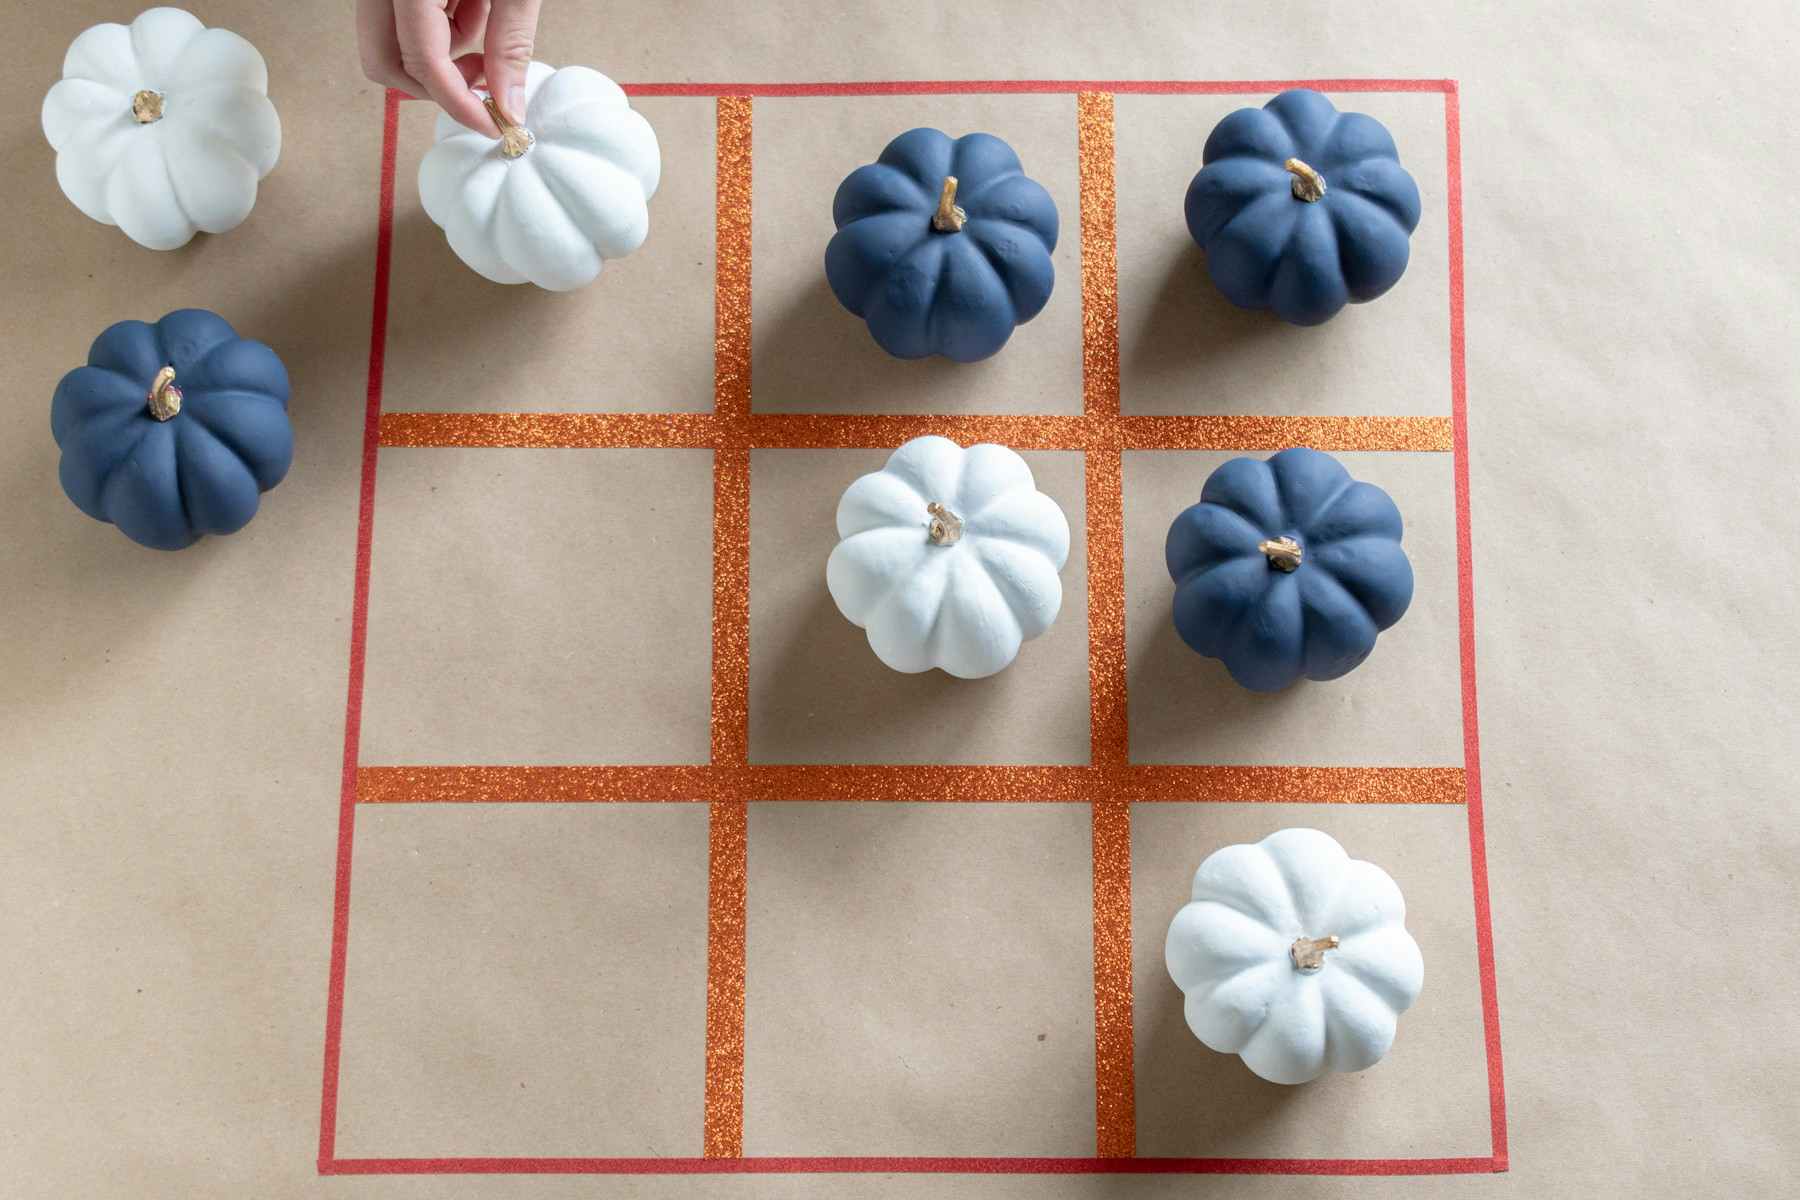 A person play tic-tac-toe with painted pumpkins and a board made from washi tape.